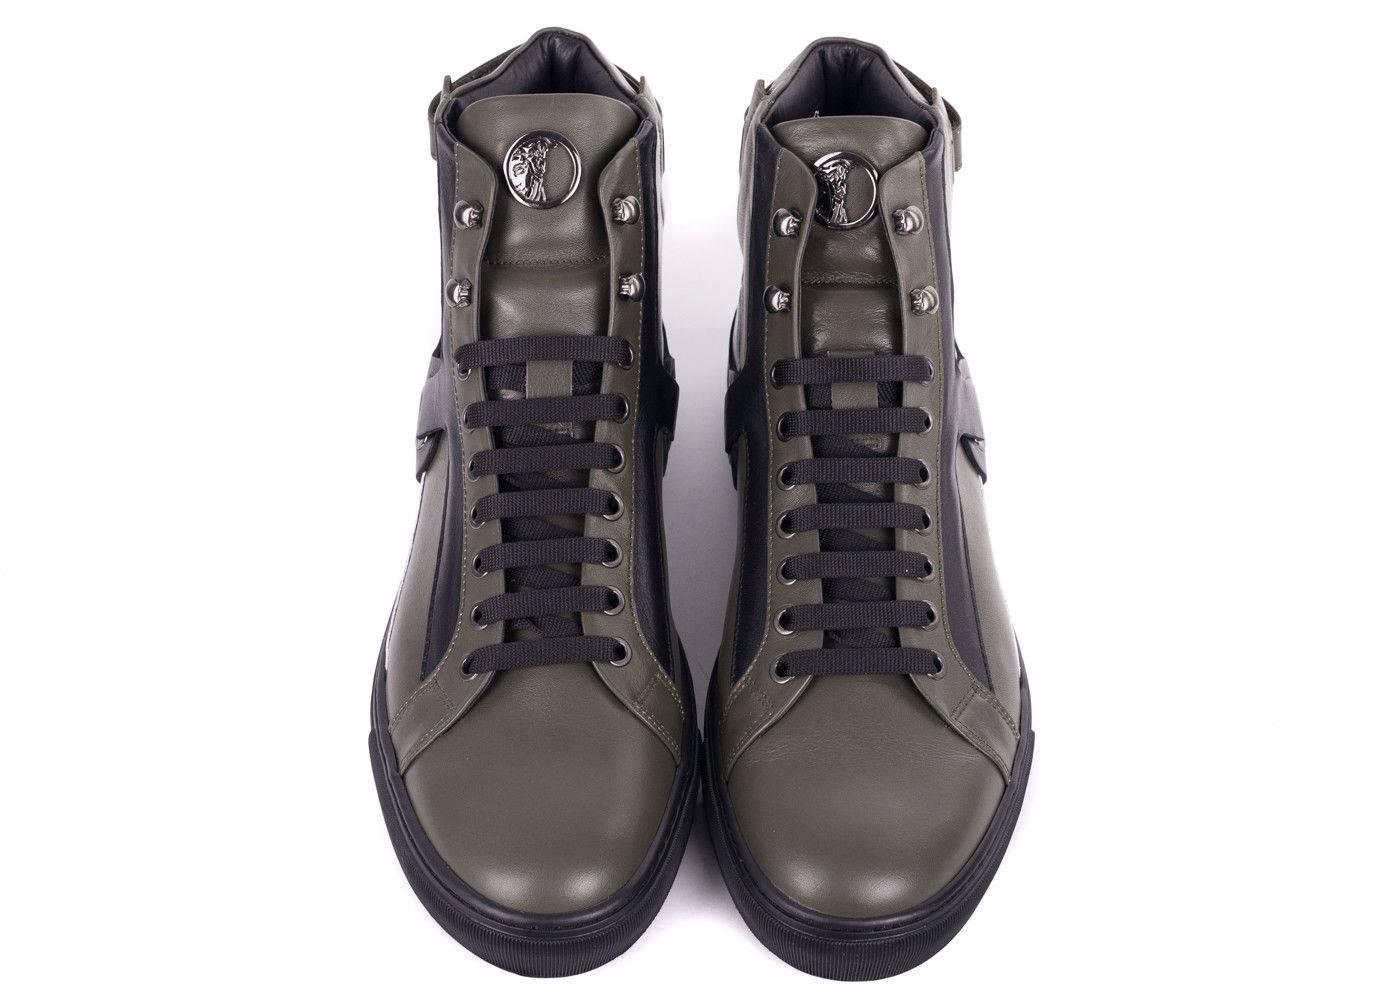 Enter the room in your Hi Top Versace Sneakers. This rich olive green sneakers feature a black leather harness, contrasting white leather panel, and an adjustable heel fastening. These modern designed sneakers will headline the concept of luxury